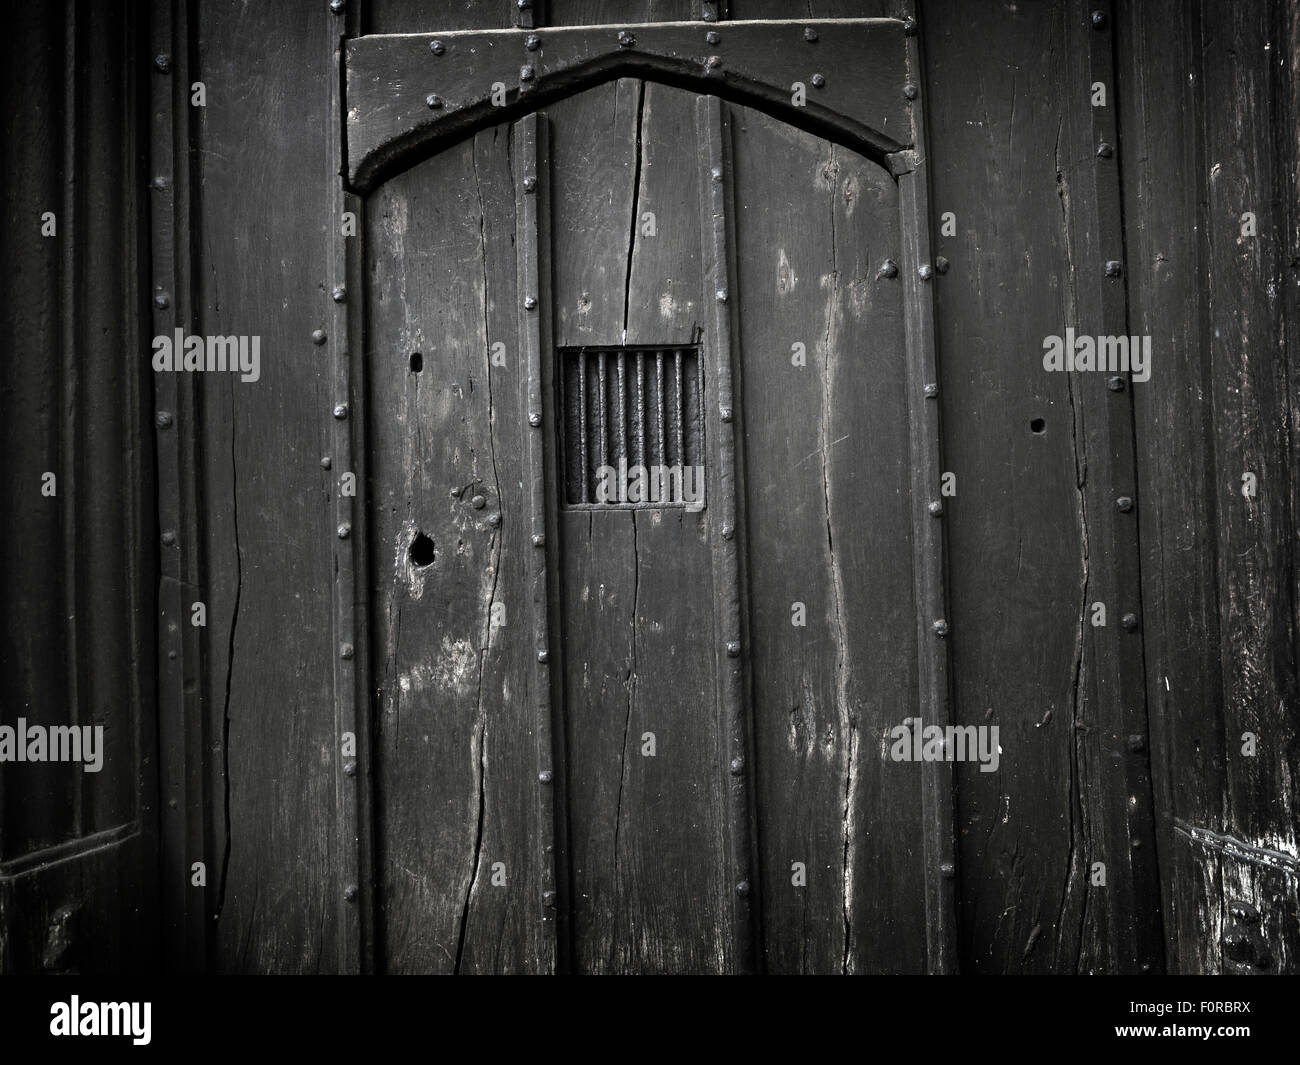 Shoot of a very old, gothic, wooden door ideal for use as a background that is dark and spooky. Many imperfections have been lef Stock Photo